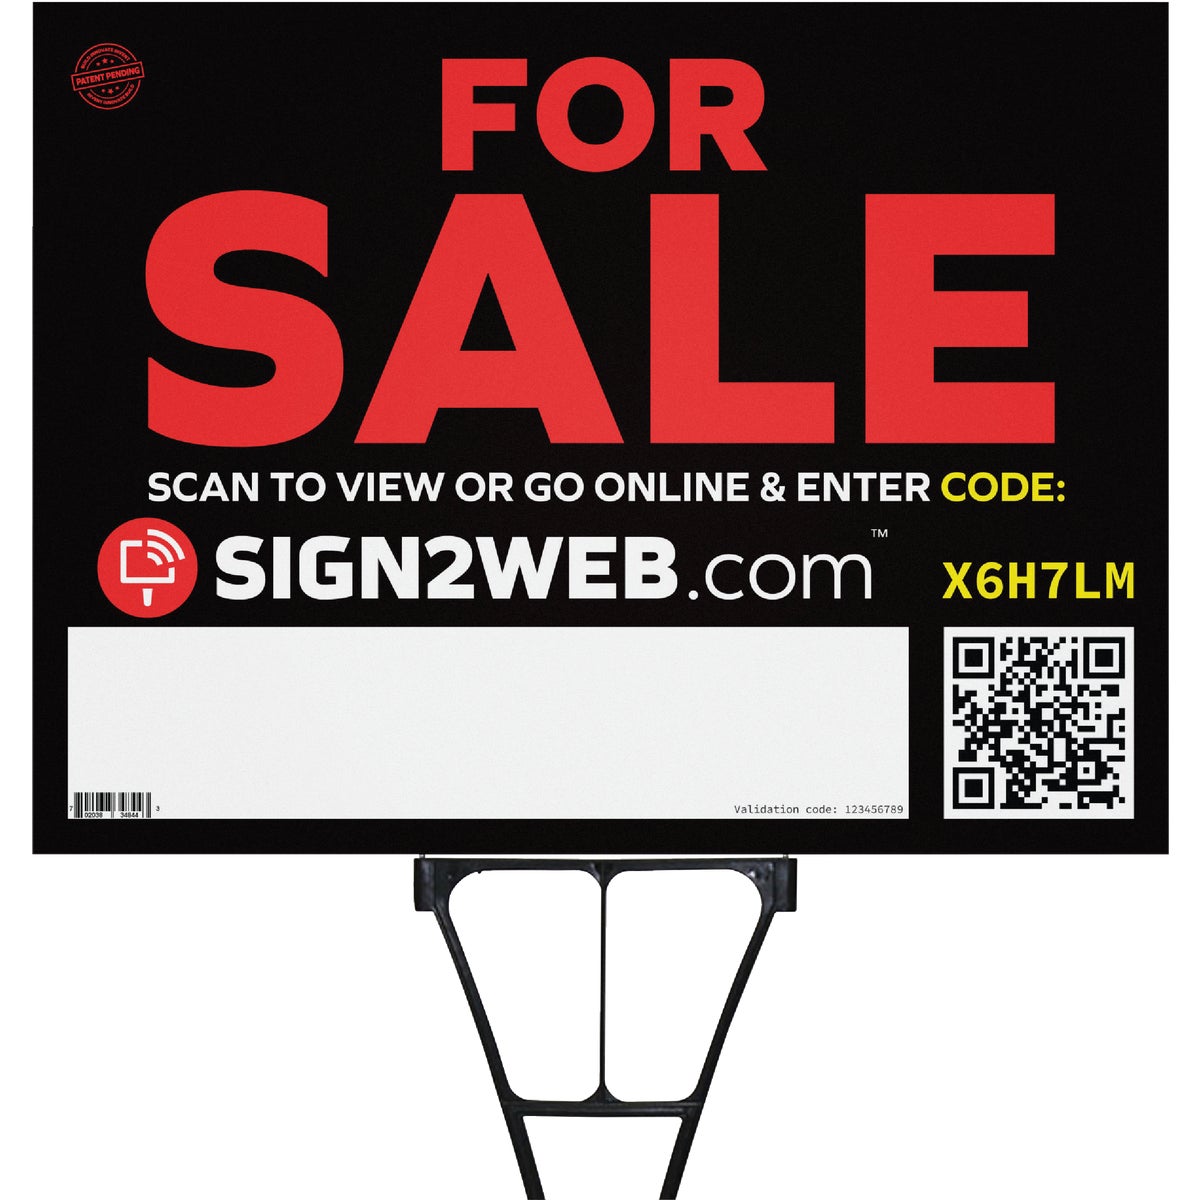 Sign2Web 18 In. x 24 In. Double-Sided For Sale Sign